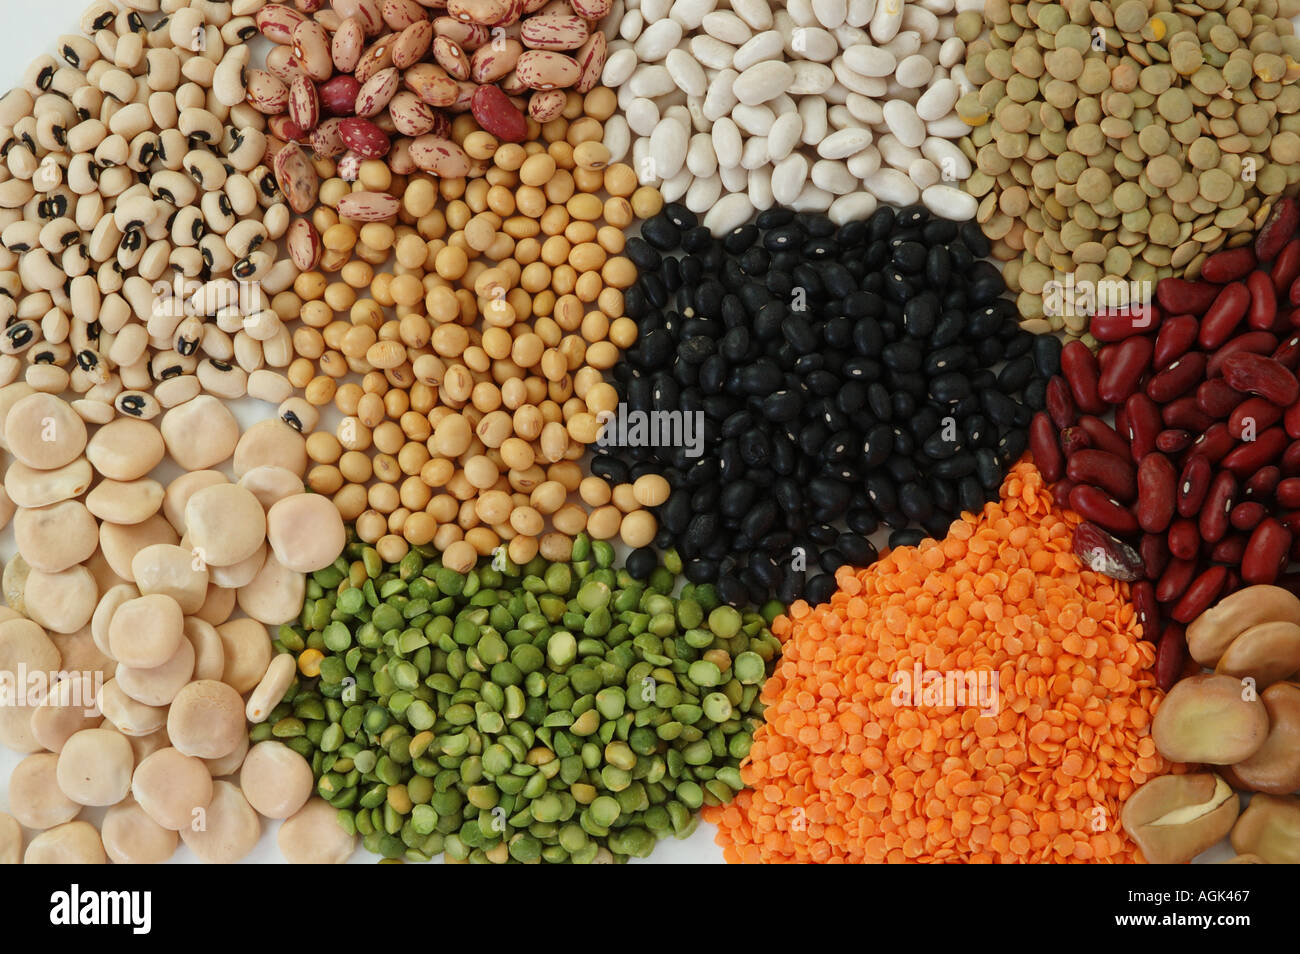 mix of peas beans and legumes dsc 6639 Stock Photo